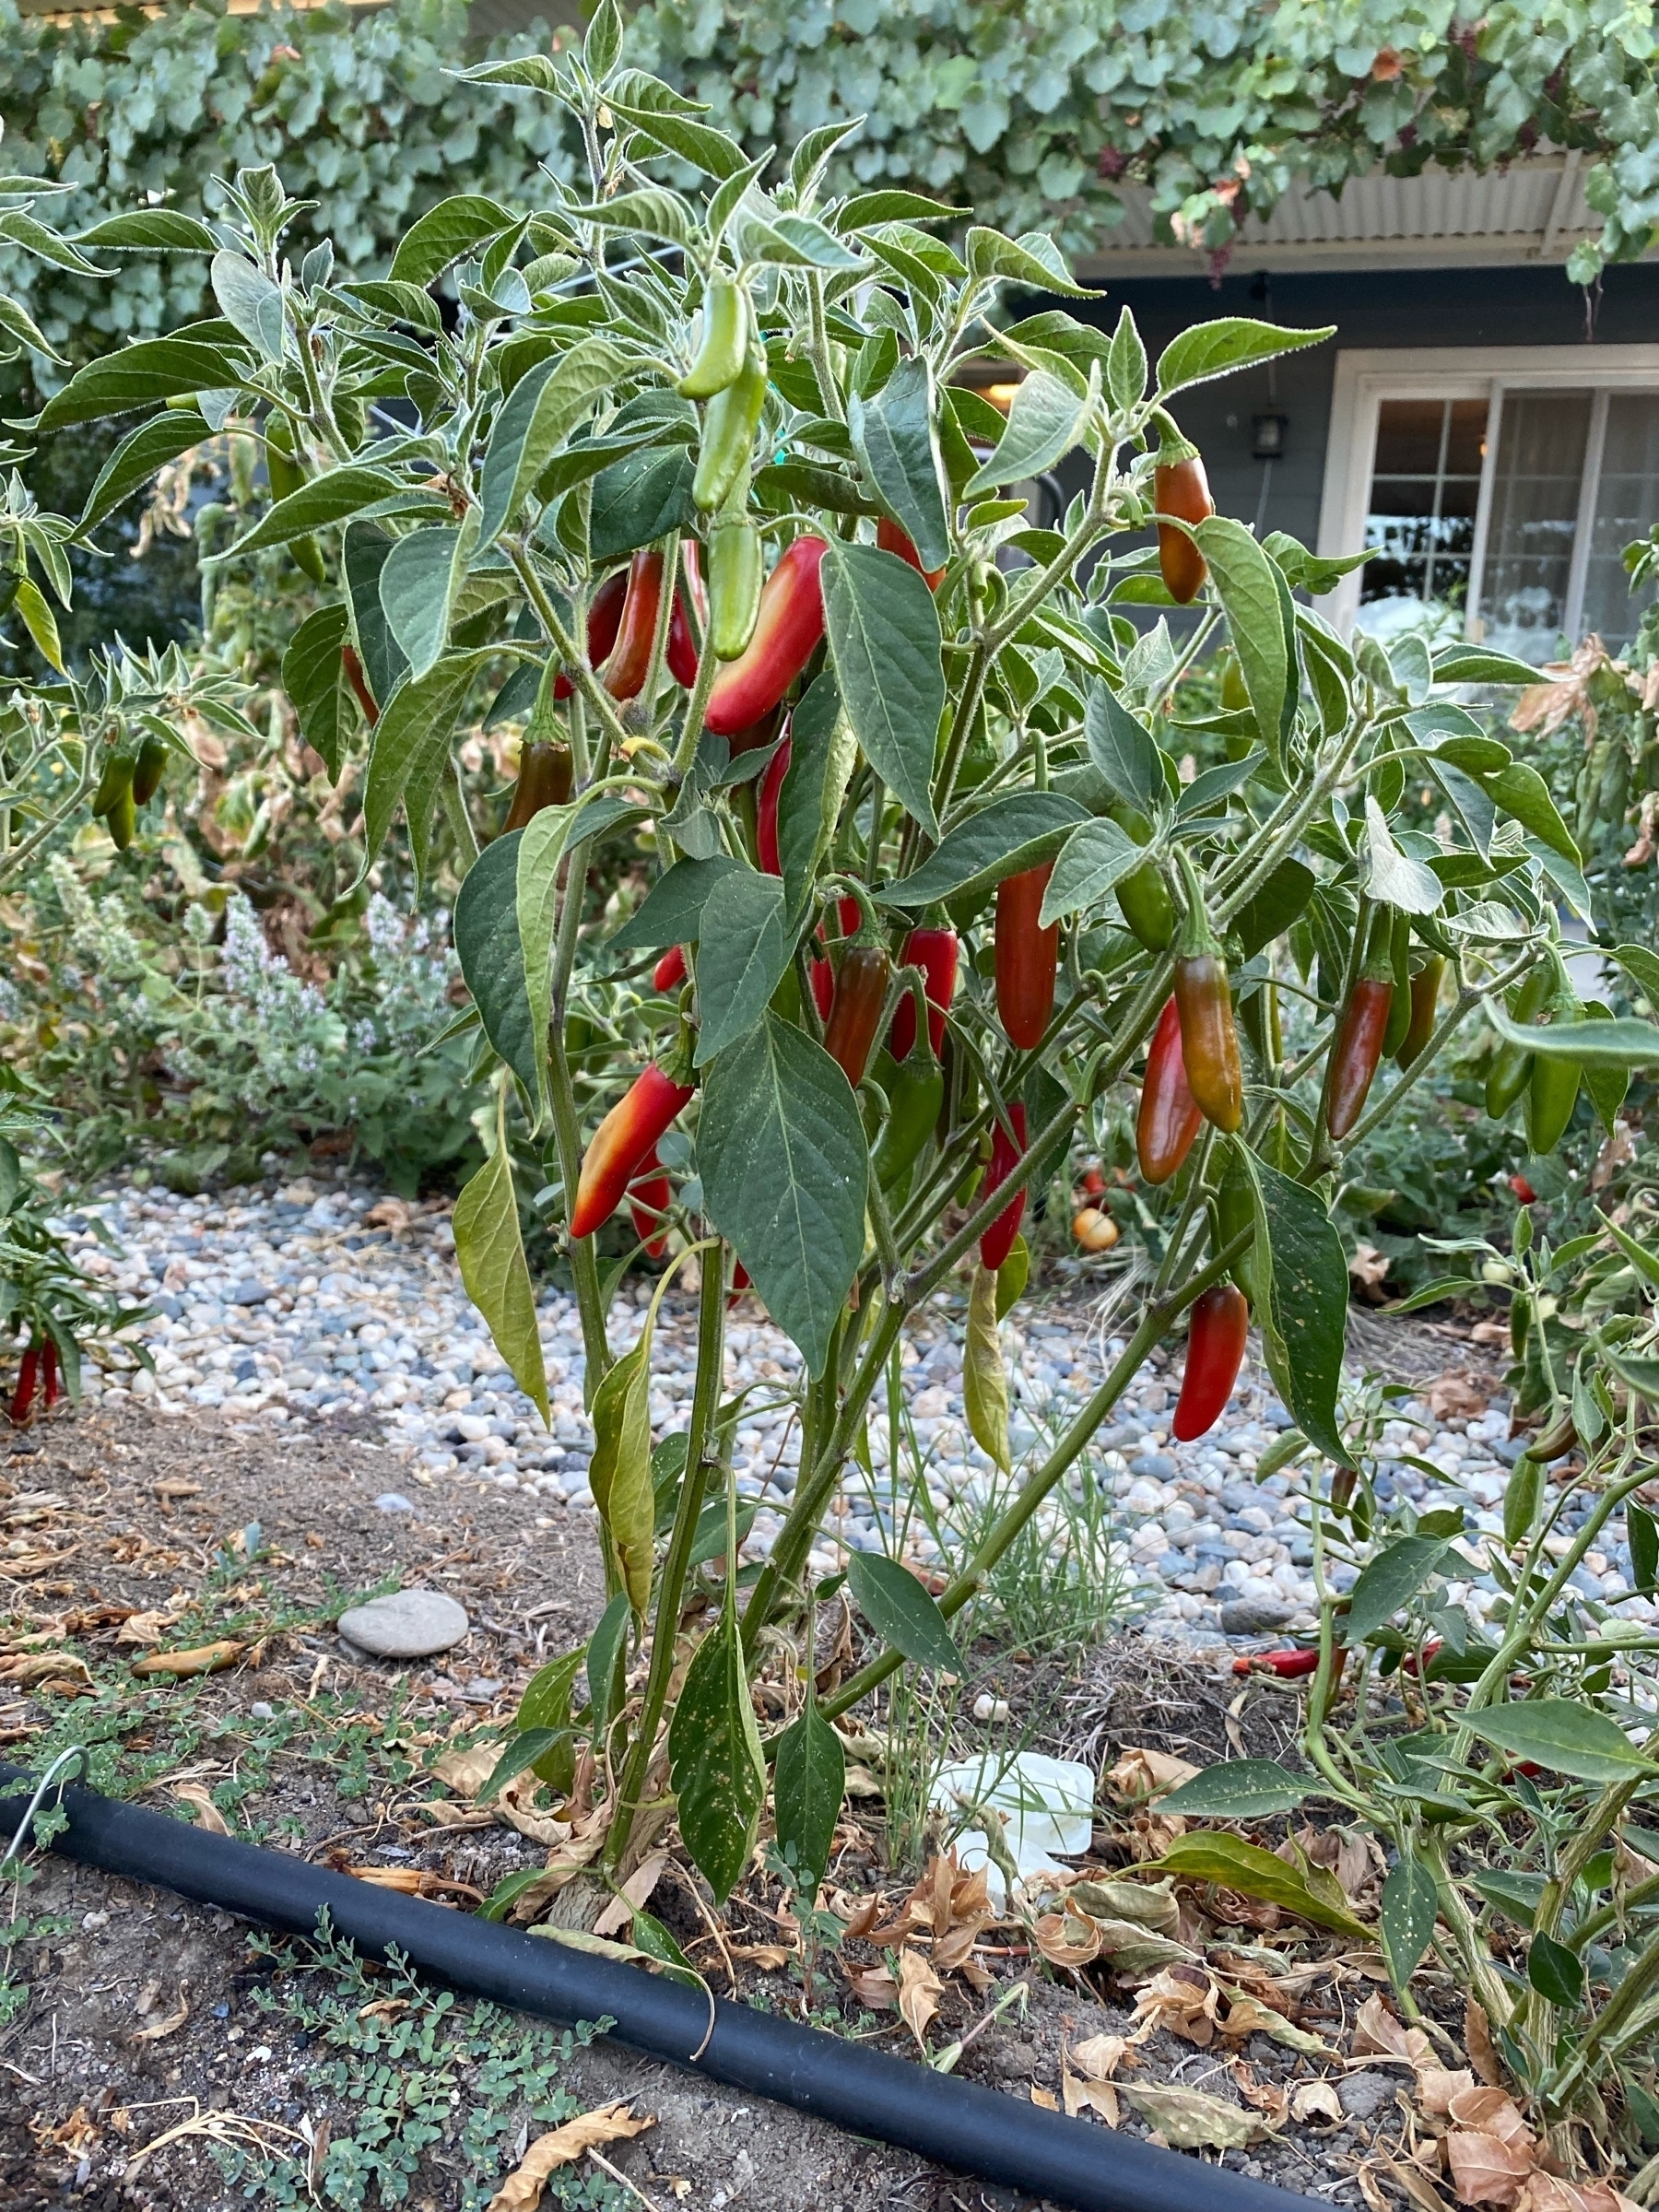 red ripe serrano peppers on a plant